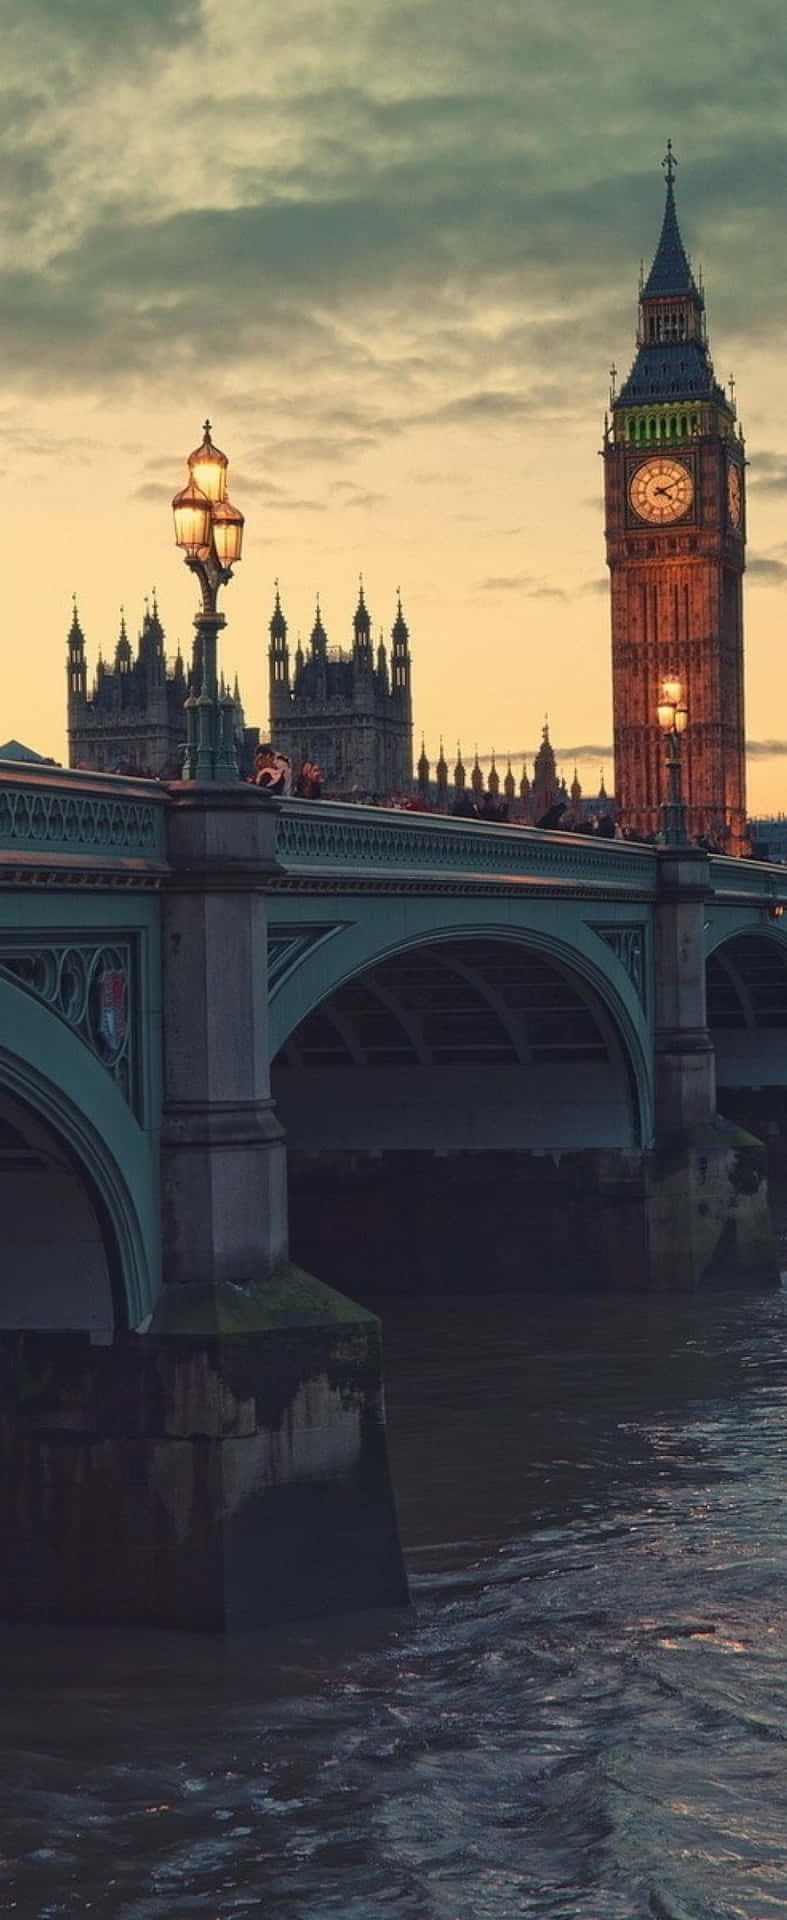 "Explore London with an Iphone" Wallpaper